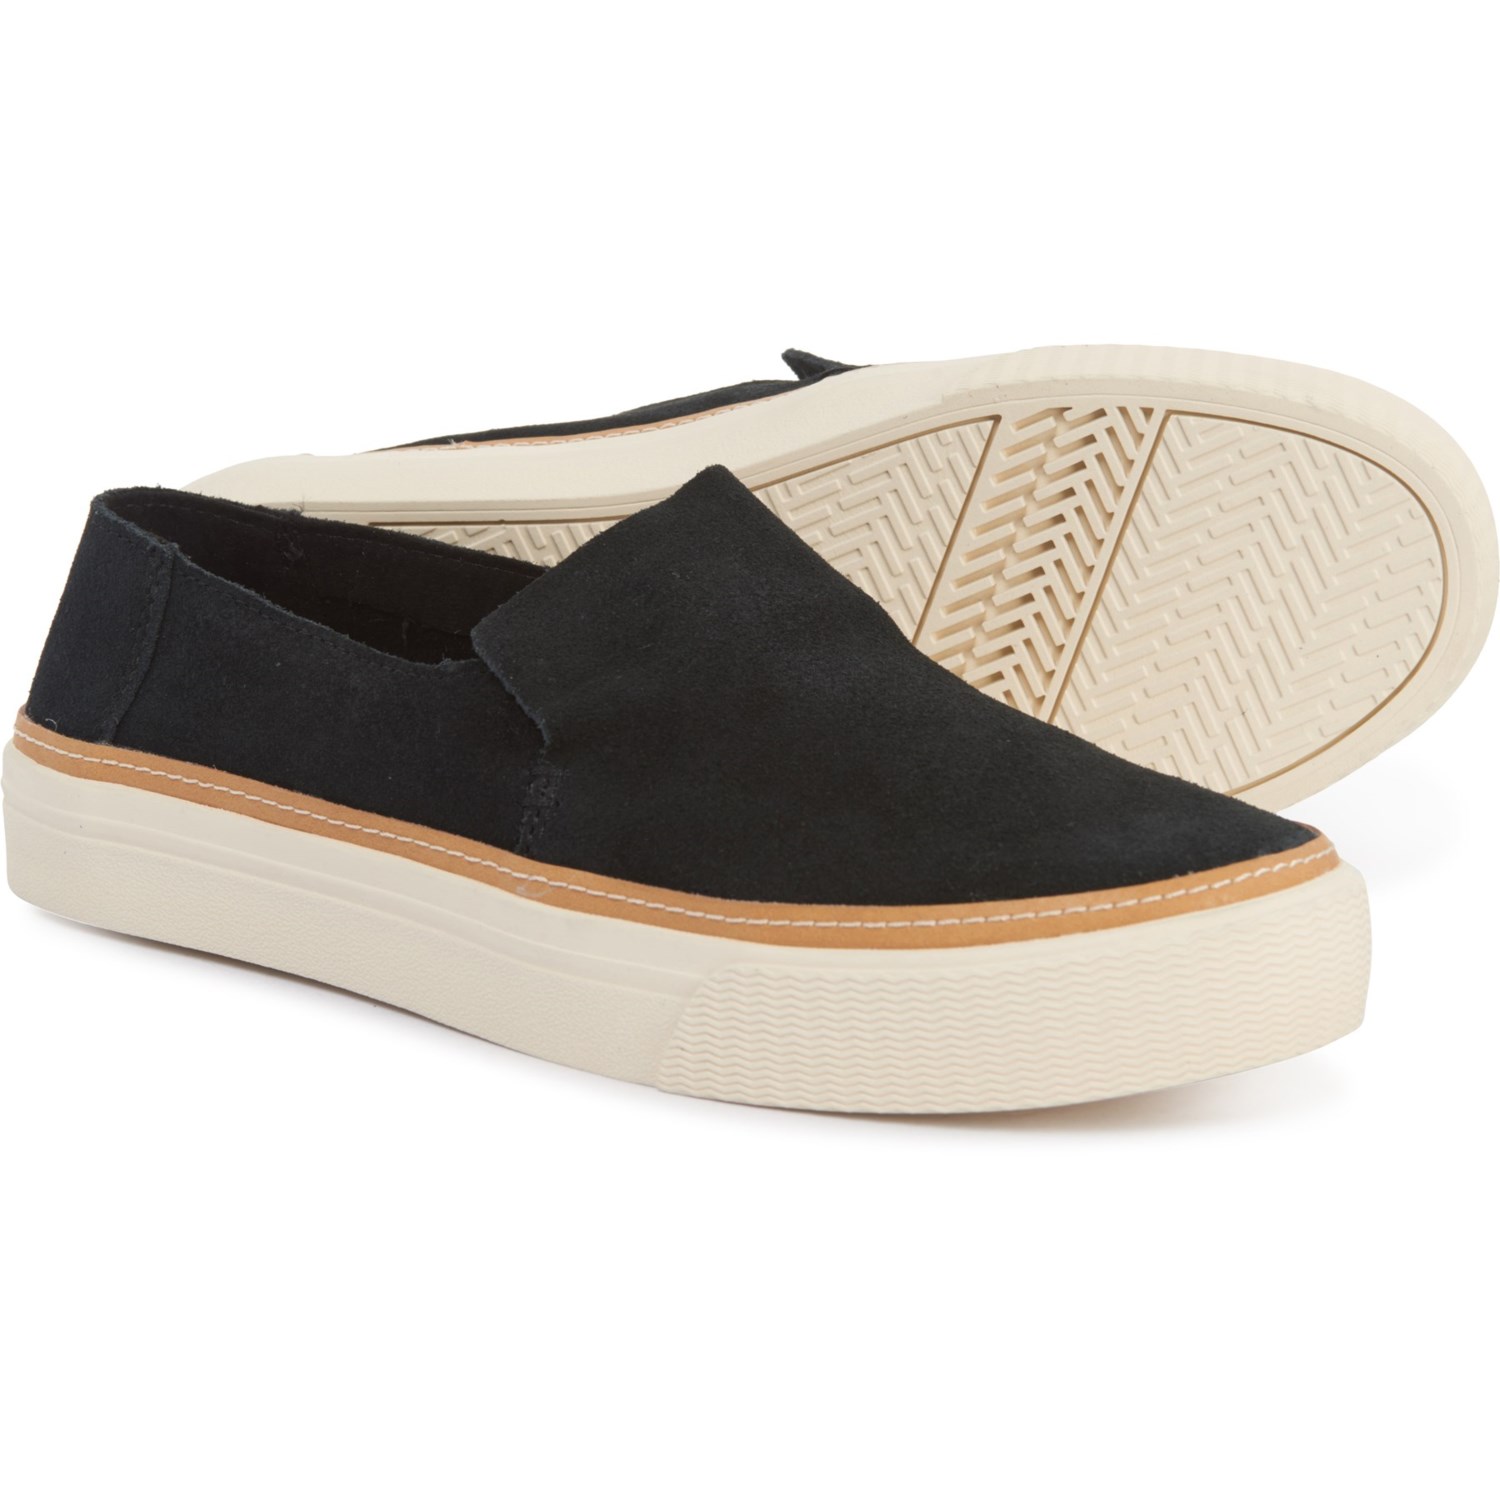 TOMS Black Sunset Sneakers (For Women)